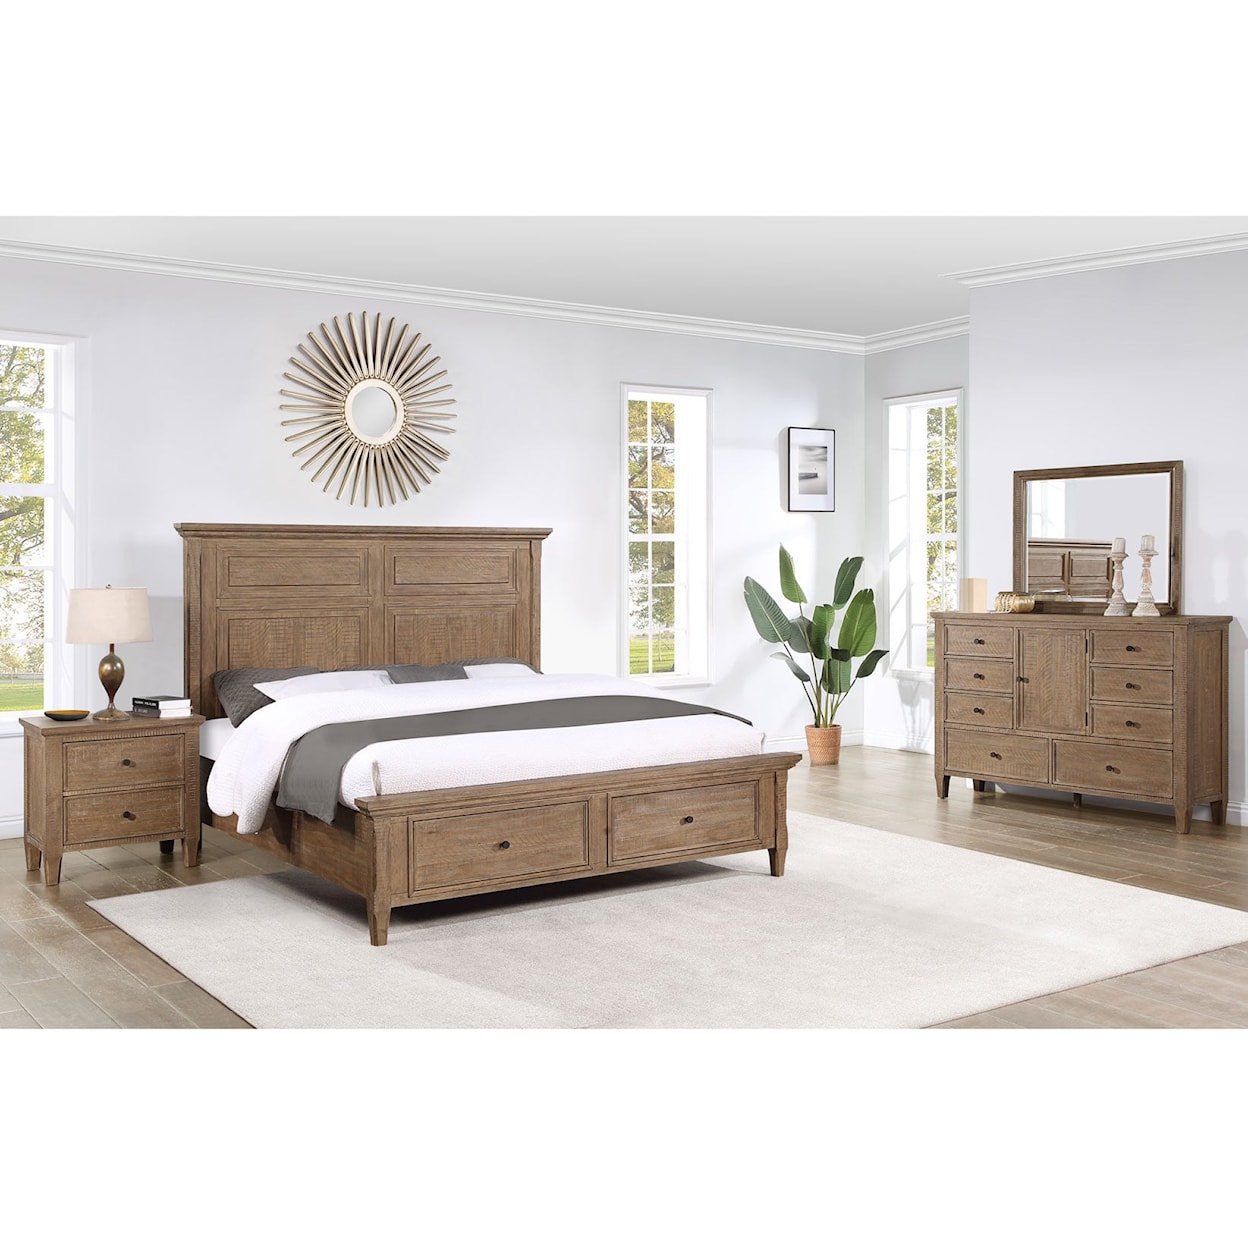 Steve Silver Riverdale Queen Storage Bed